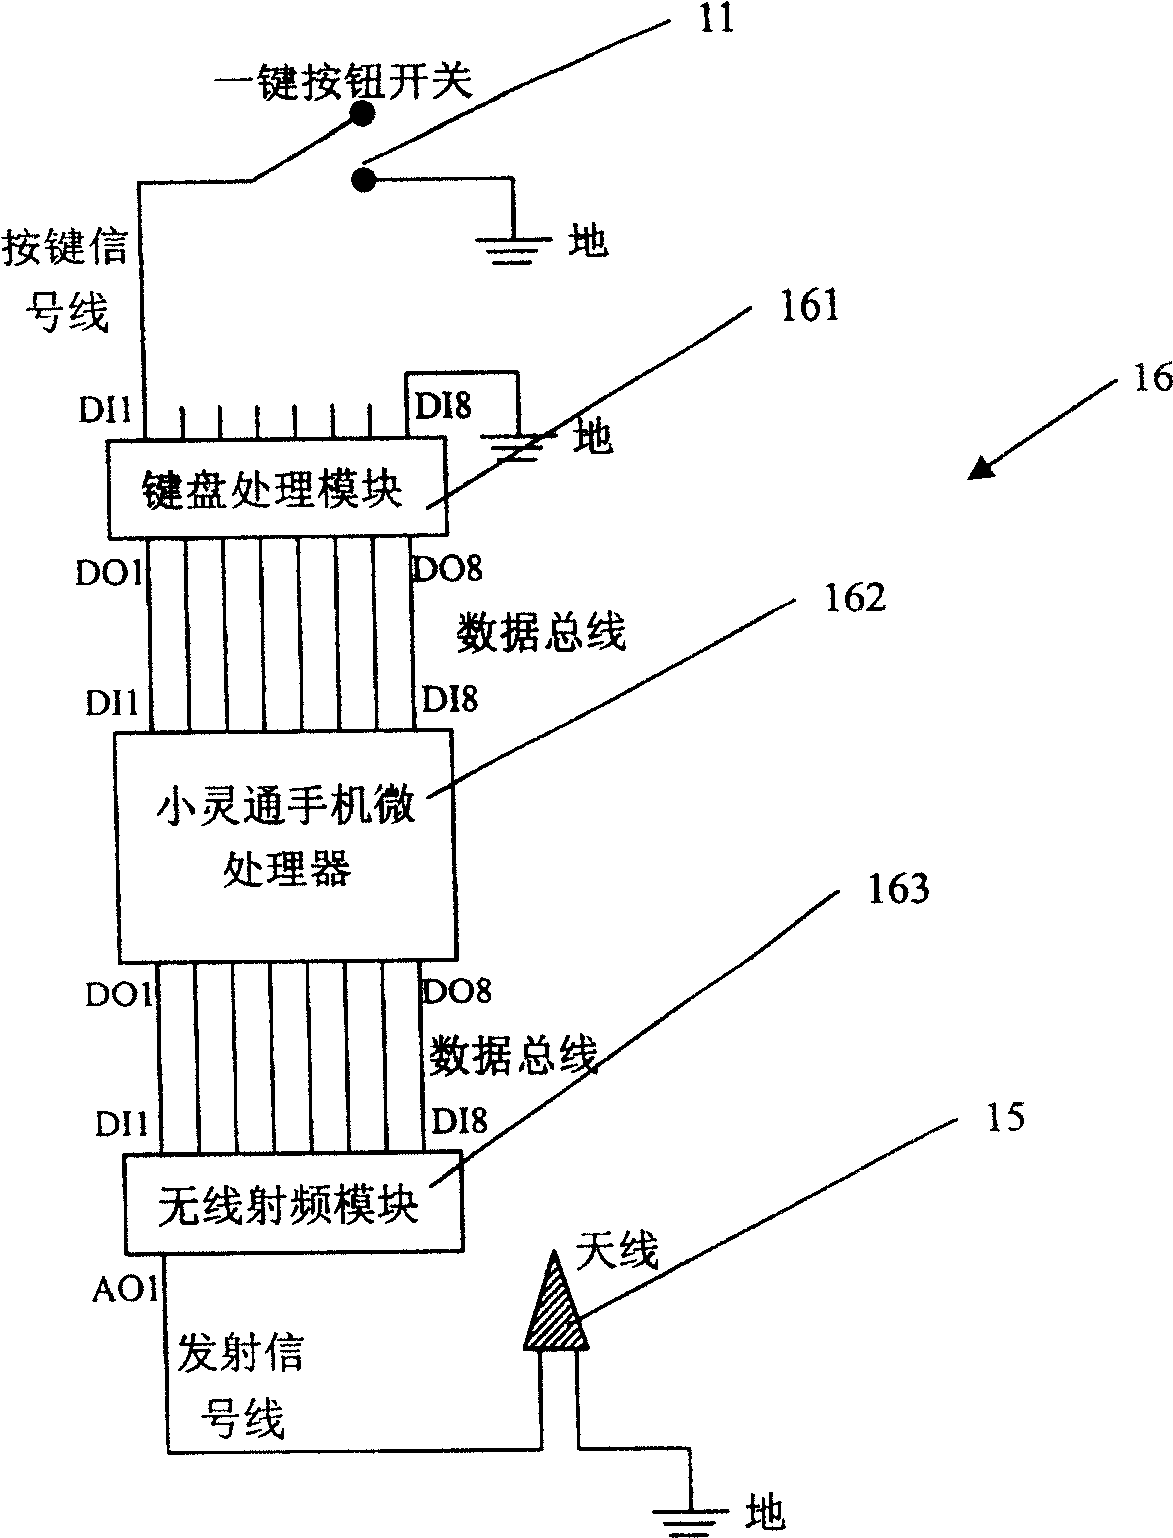 One-button combined positioning method for PAS positioning terminal and wireless fixed telephone